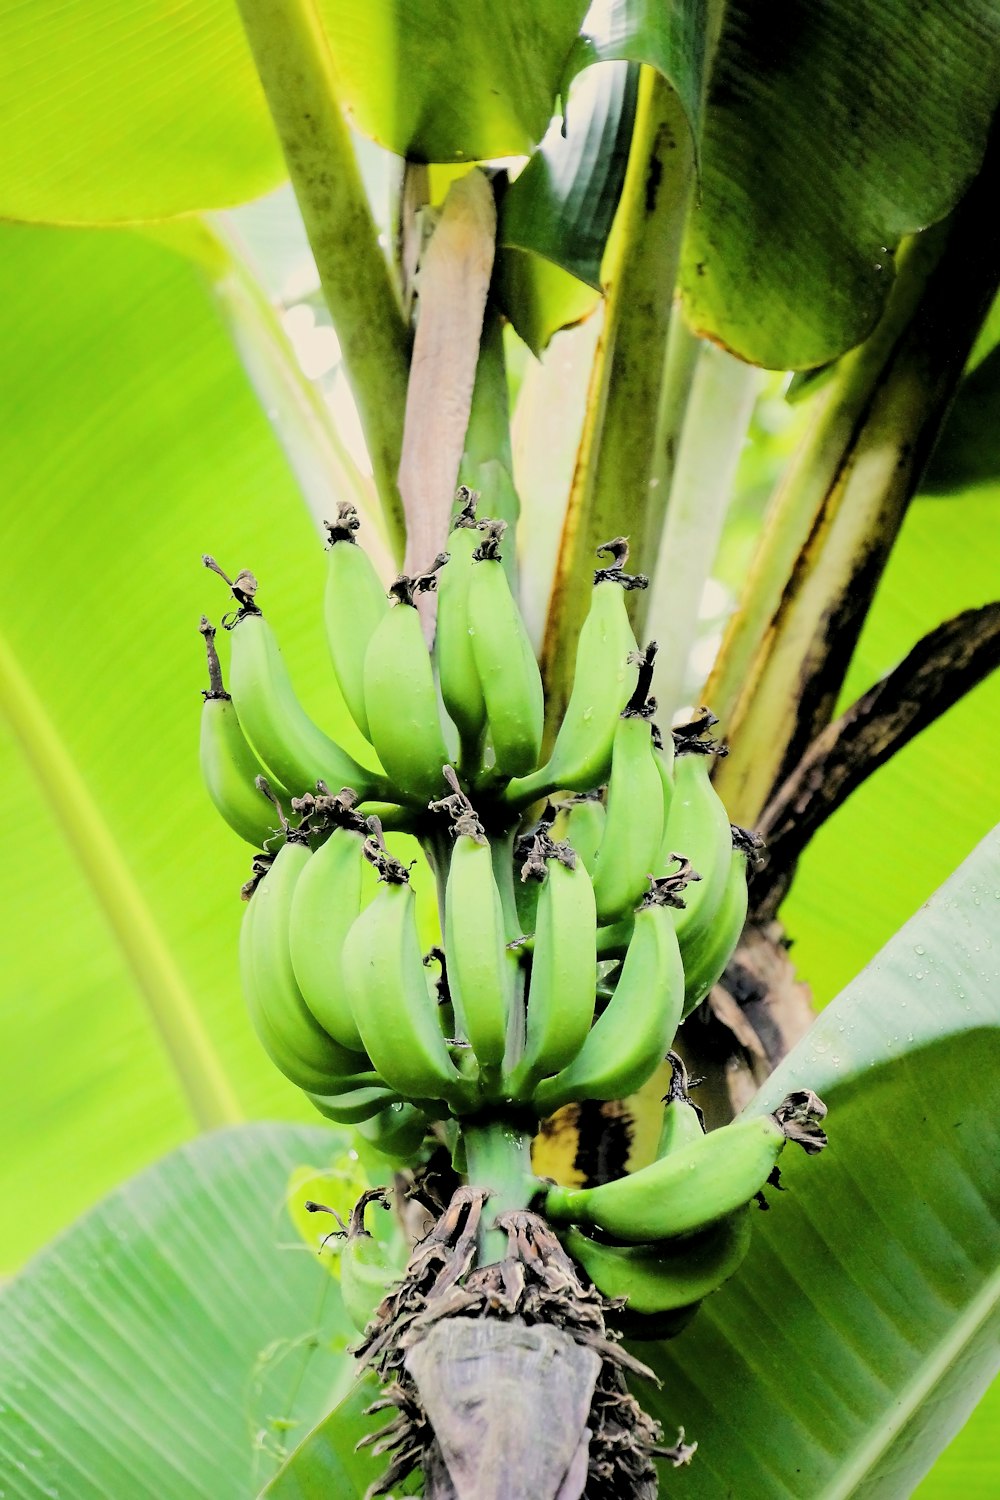 a bunch of green bananas hanging from a tree